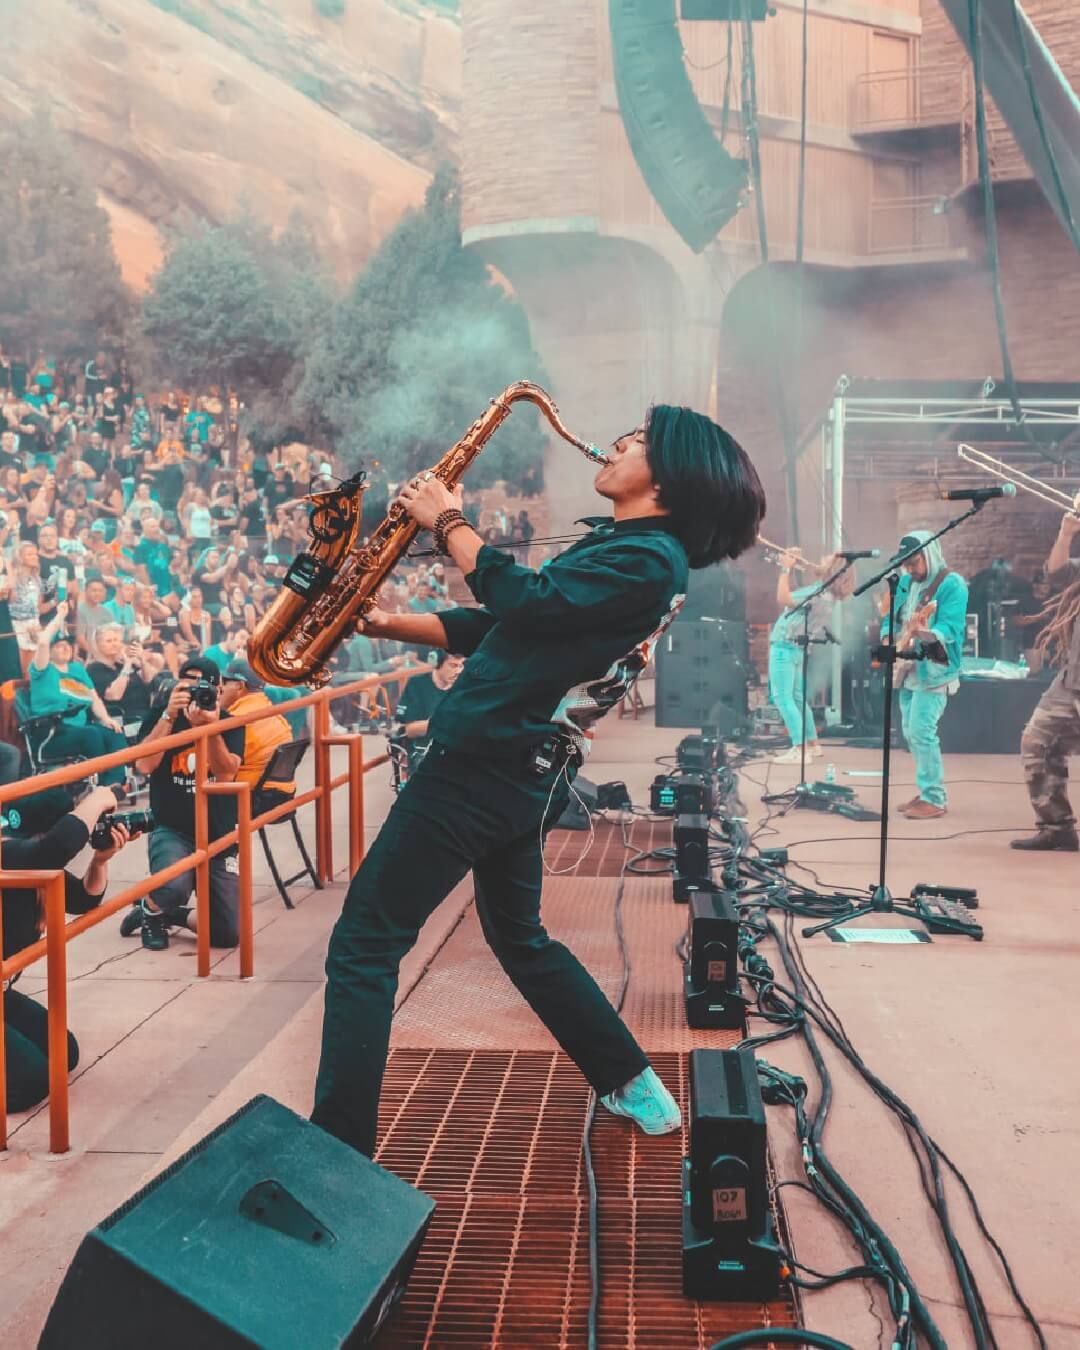 musician plays sax on stage